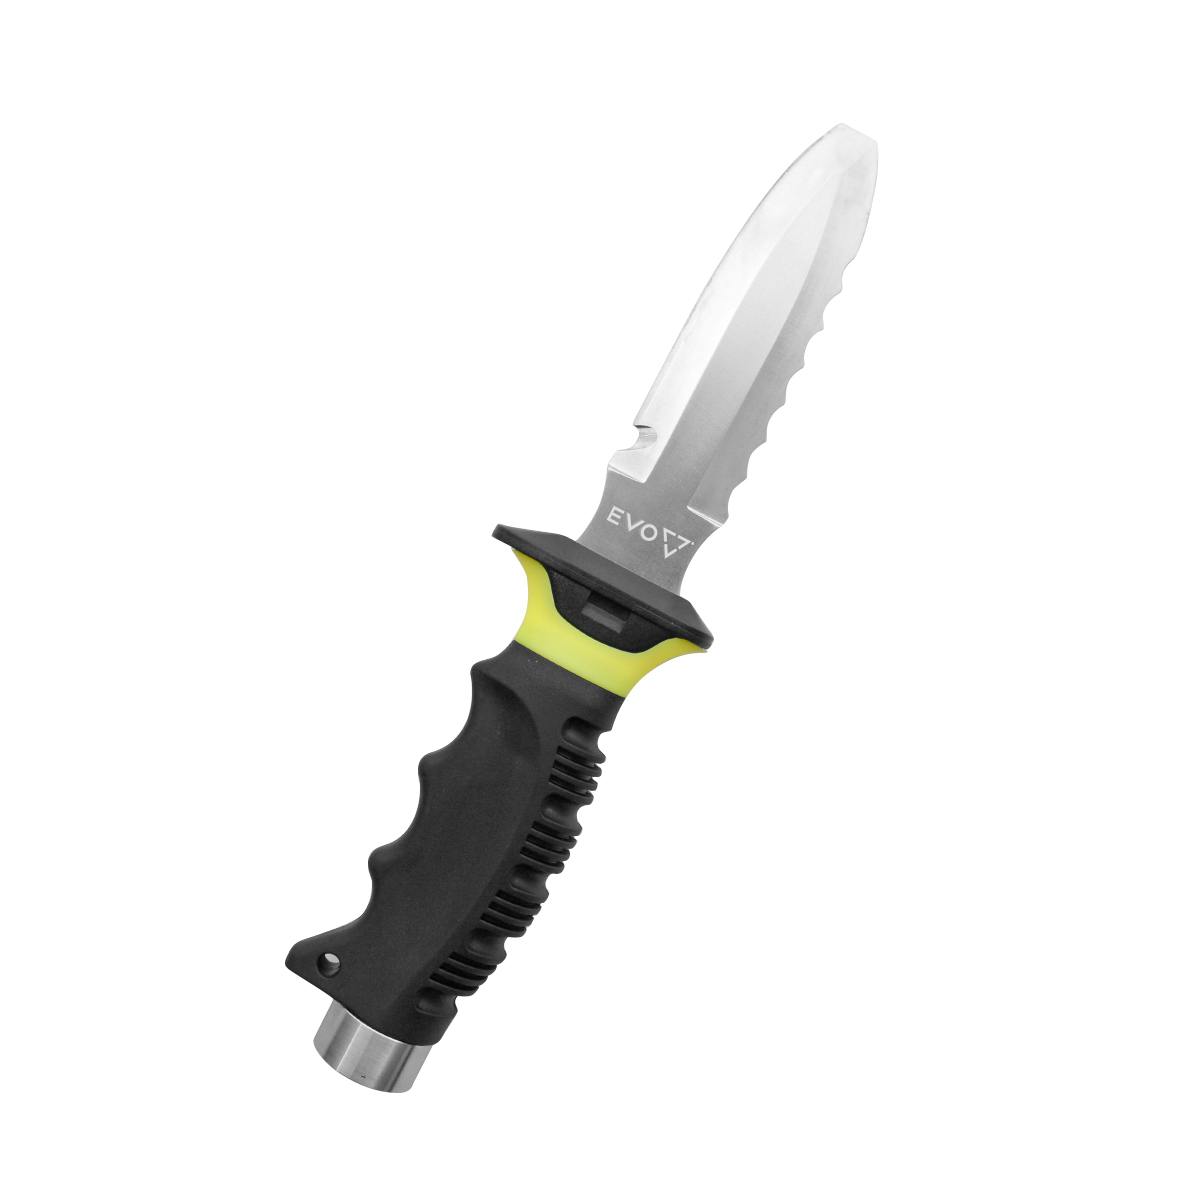 EVO Stainless Dive Knife with Yellow Hand Guard - Blunt Tip Assembled